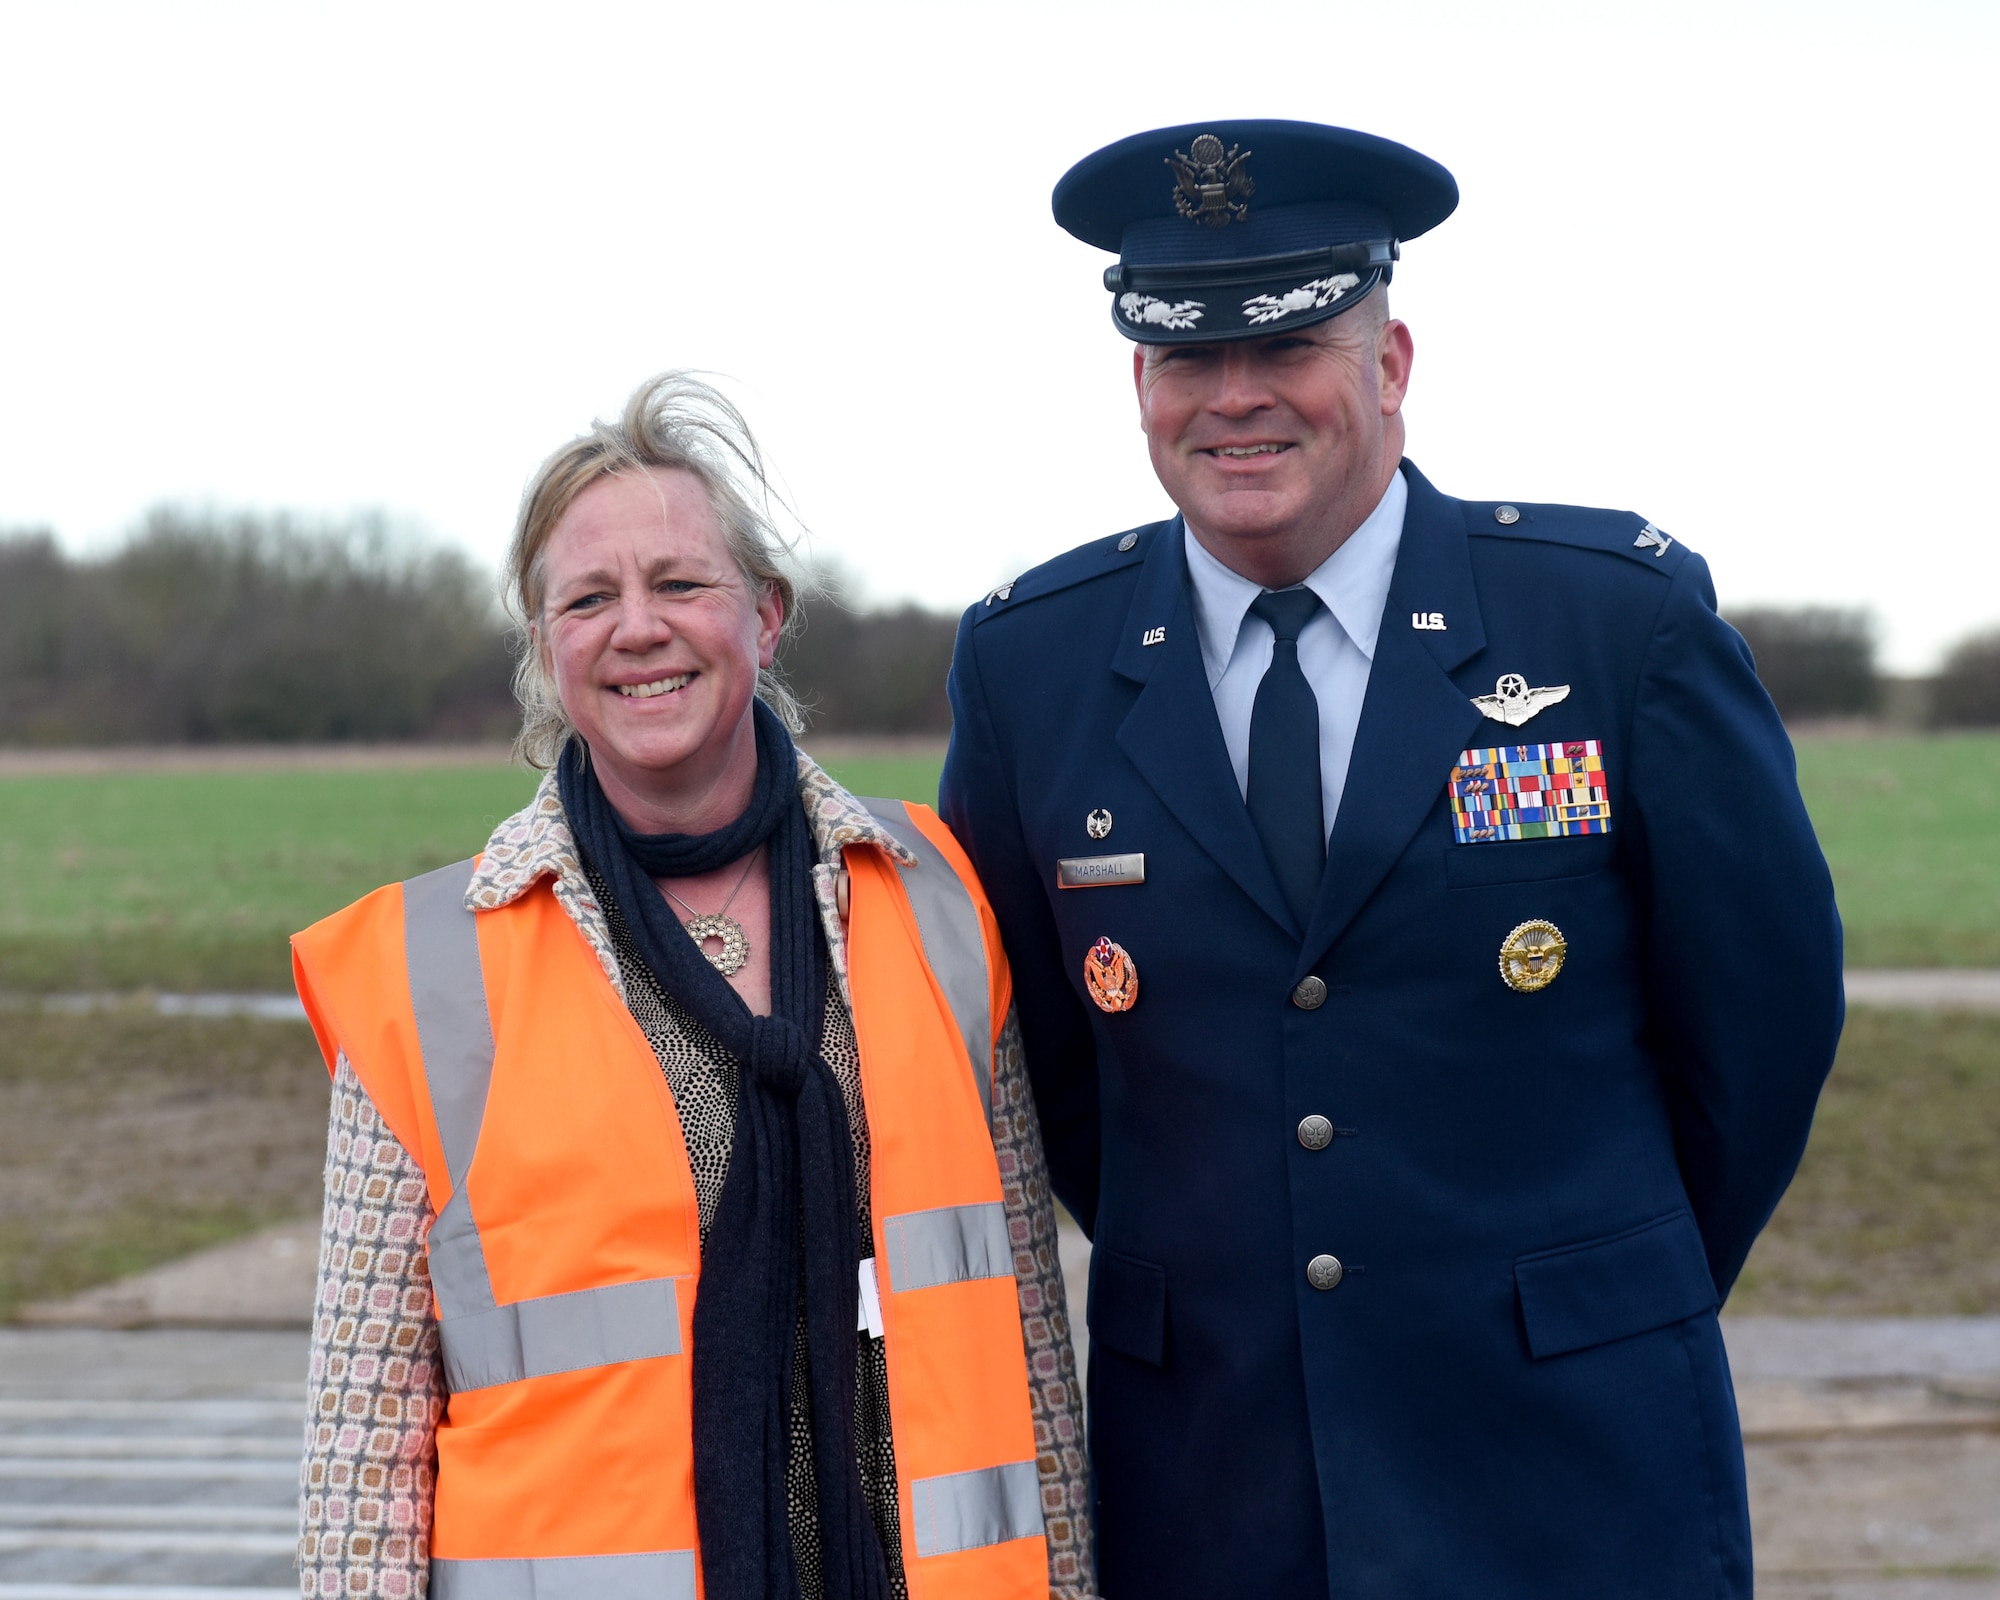 Col. Will Marshall, 48th Fighter Wing commander, poses for a photo with Alice Pawsey, land owner of Lavenham Airfiled,at Lavenham Airfield, England, Jan. 20, 2020. Marshall visited Lavenham Airfield to help lay down the first brick for a long-lasting memorial honoring 233 U.S. military service members that died in World War II. (U.S. Air Force photo by Airman 1st Class Madeline Herzog)